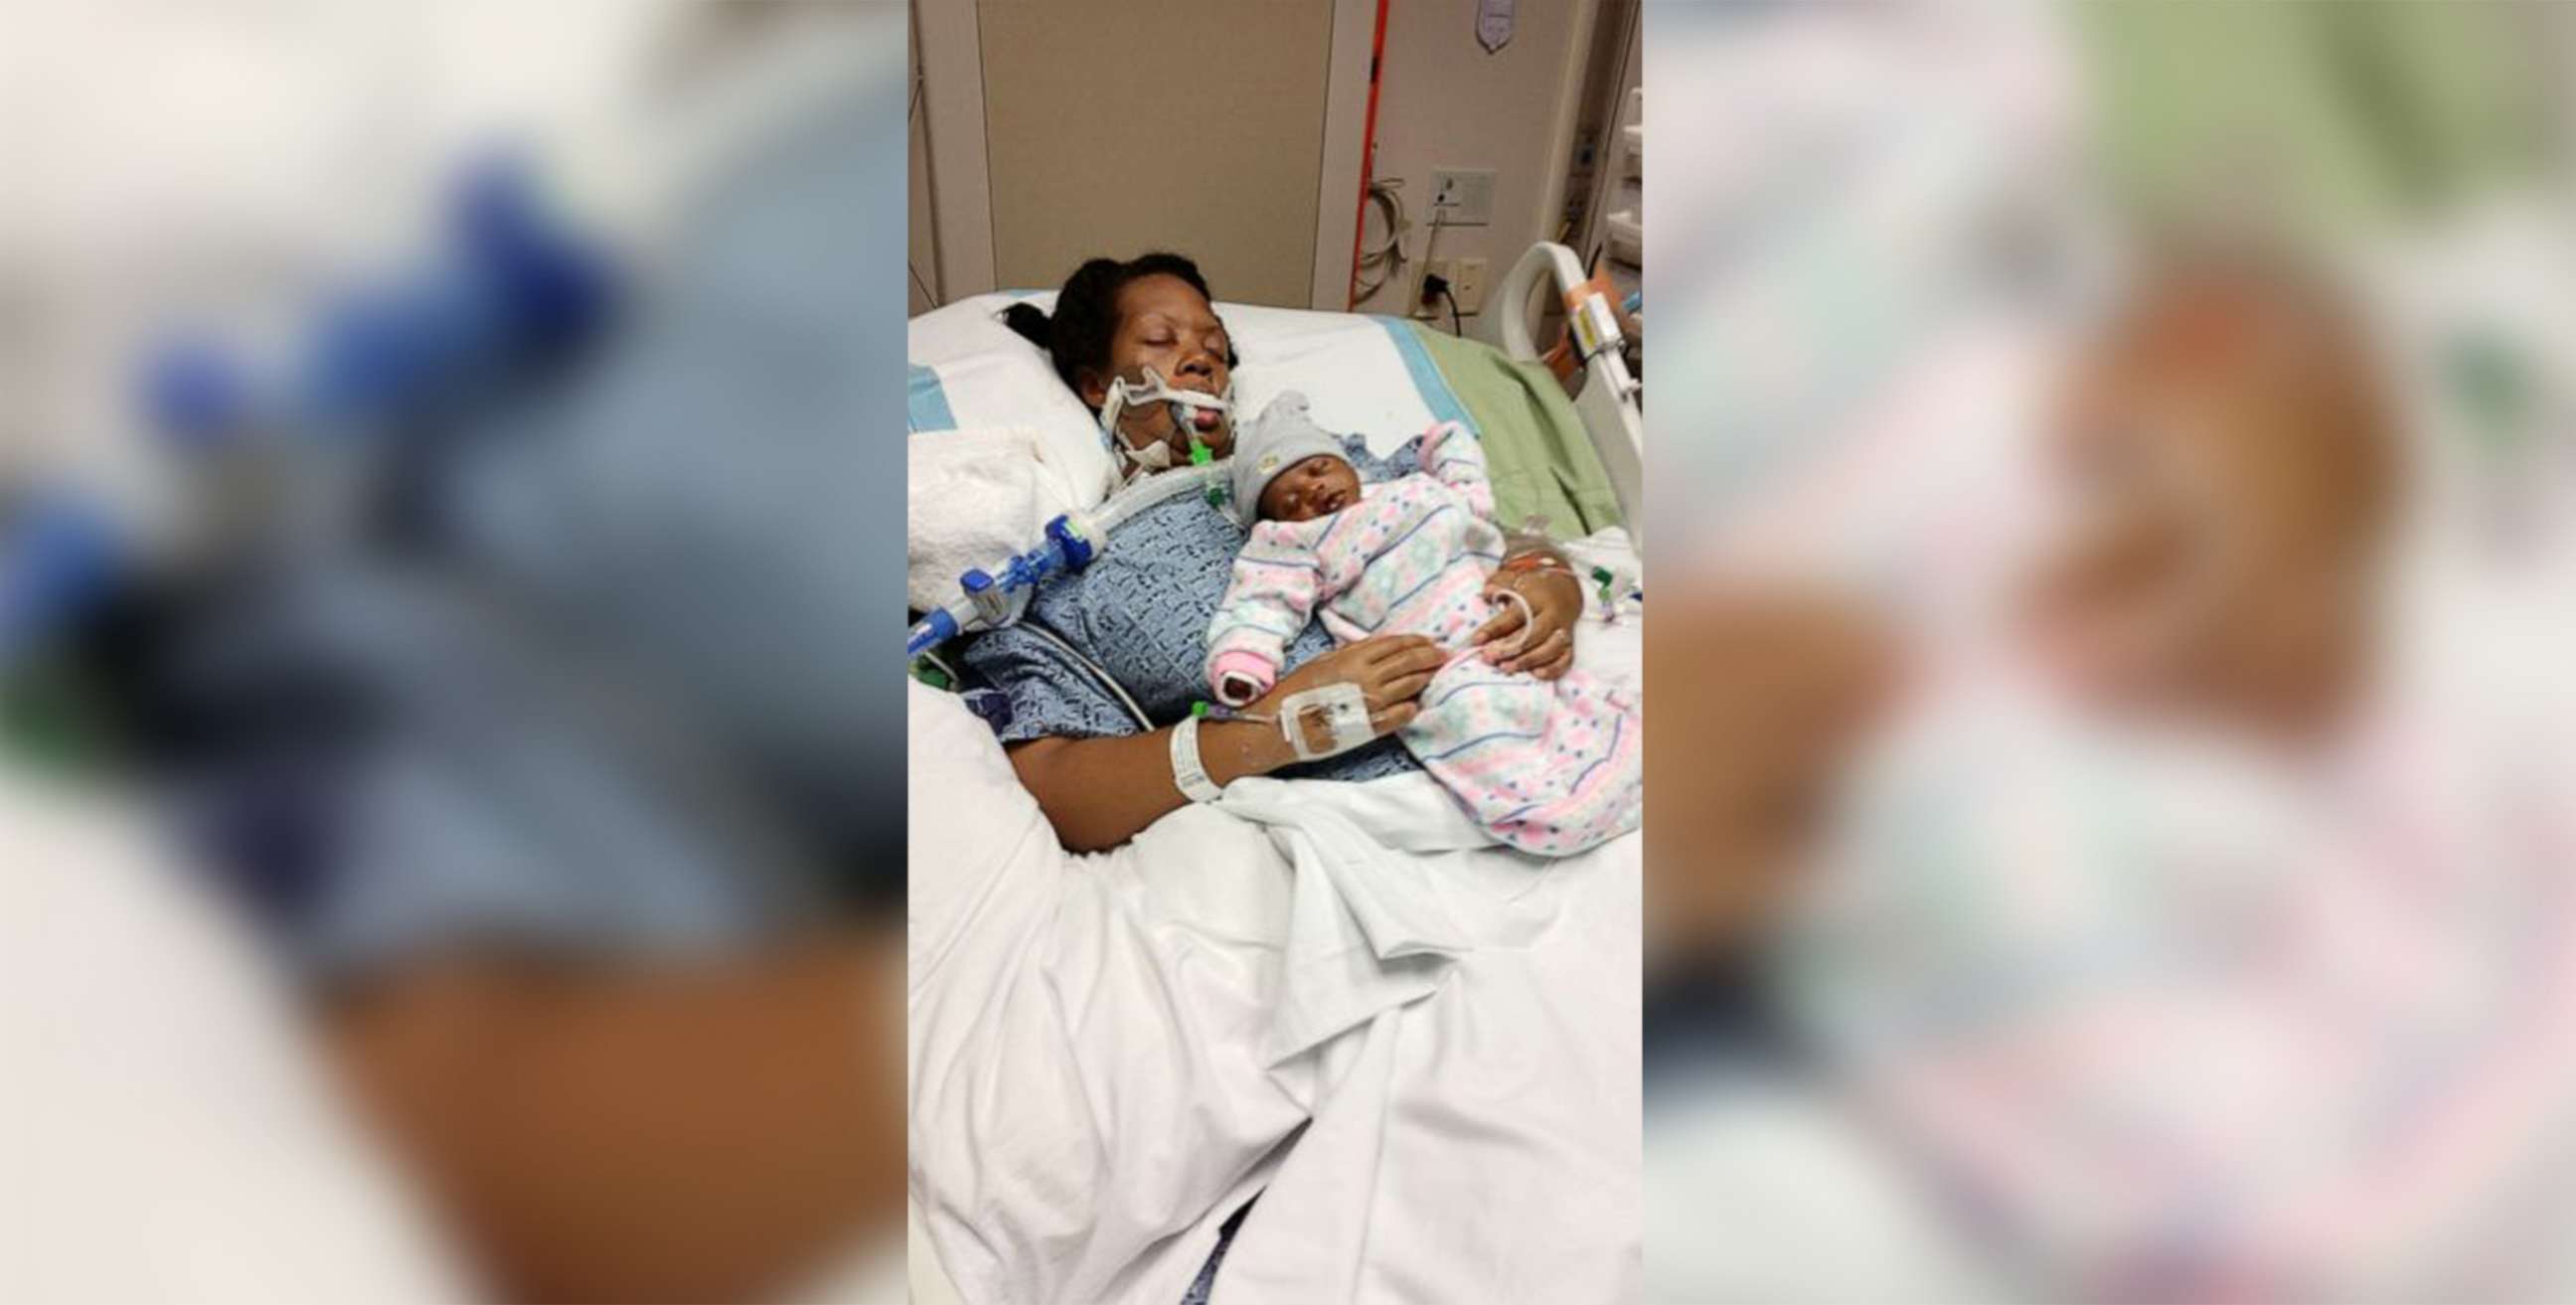 PHOTO: Shalon Irving is photographed with her daughter, Soleil, while hospitalized in January 2017.	